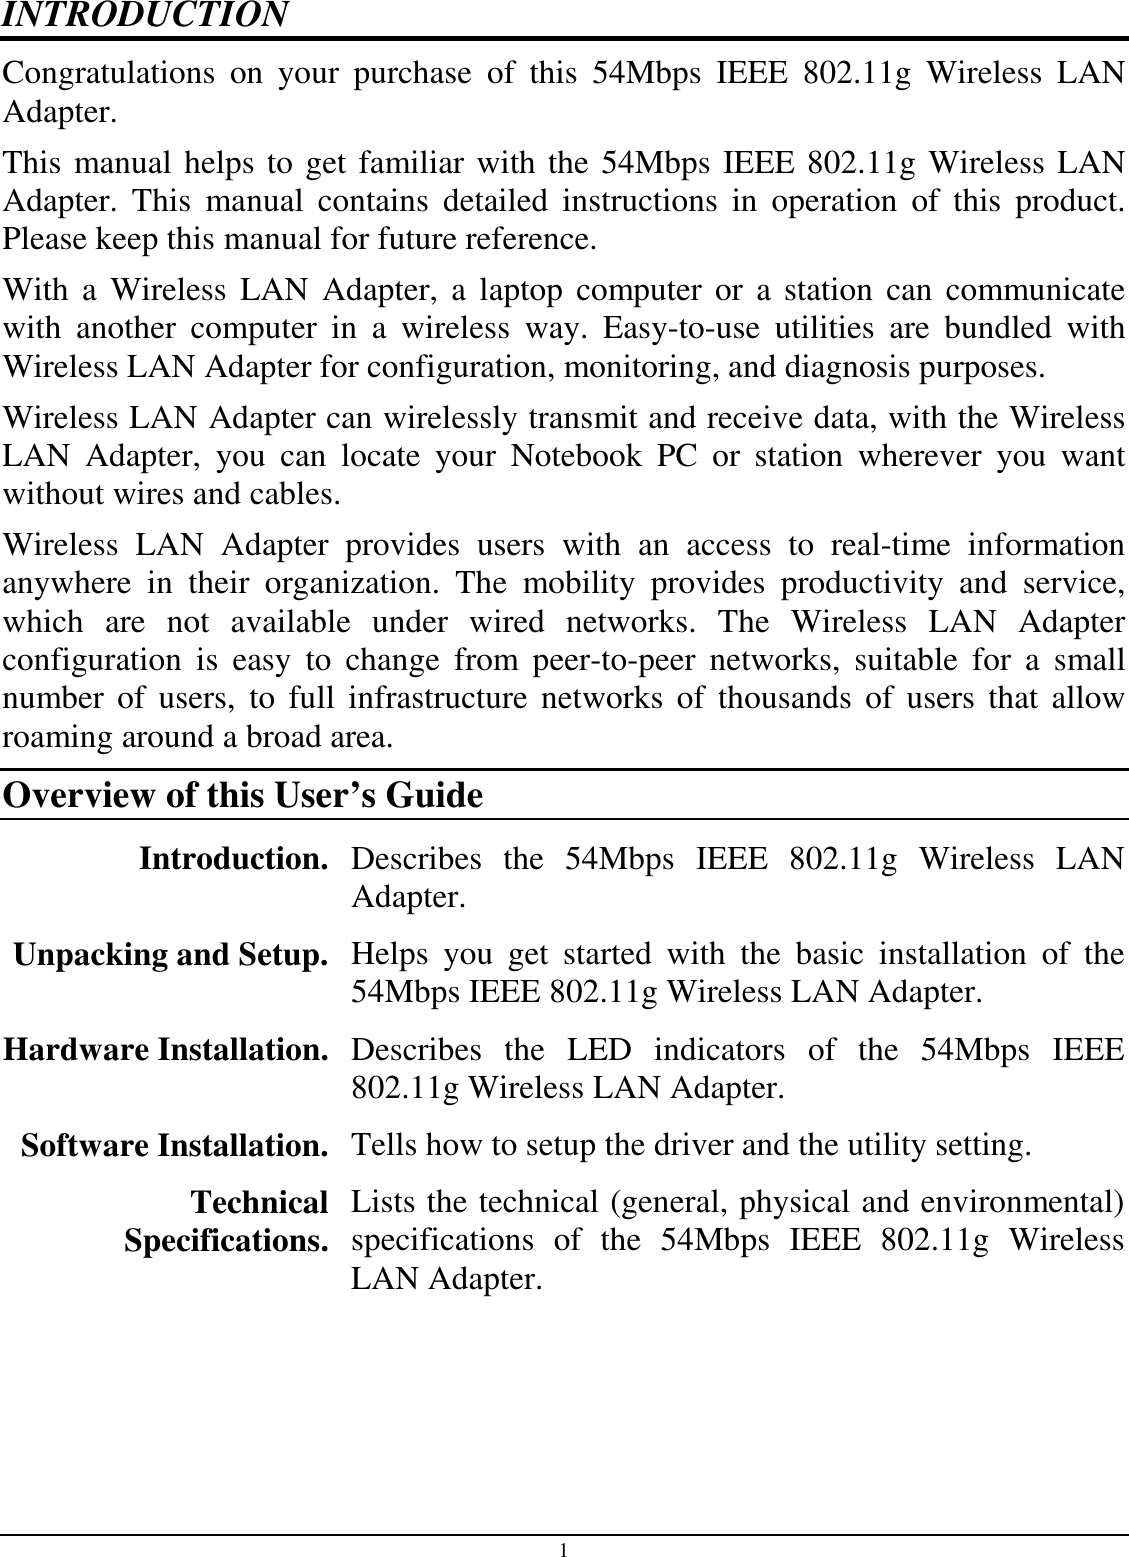 1 INTRODUCTION Congratulations  on  your  purchase  of  this  54Mbps  IEEE  802.11g  Wireless  LAN Adapter. This manual helps to get familiar with the 54Mbps IEEE 802.11g Wireless LAN Adapter.  This  manual  contains  detailed  instructions  in  operation  of  this  product. Please keep this manual for future reference. With a  Wireless  LAN  Adapter,  a  laptop  computer  or  a  station  can  communicate with  another  computer  in  a  wireless  way.  Easy-to-use  utilities  are  bundled  with Wireless LAN Adapter for configuration, monitoring, and diagnosis purposes.  Wireless LAN Adapter can wirelessly transmit and receive data, with the Wireless LAN  Adapter,  you  can  locate  your  Notebook  PC  or  station  wherever  you  want without wires and cables. Wireless  LAN  Adapter  provides  users  with  an  access  to  real-time  information anywhere  in  their  organization.  The  mobility  provides  productivity  and  service, which  are  not  available  under  wired  networks.  The  Wireless  LAN  Adapter configuration  is  easy  to  change  from  peer-to-peer  networks,  suitable  for  a  small number  of users,  to  full  infrastructure  networks  of  thousands  of users  that  allow roaming around a broad area.  Overview of this User’s Guide Introduction. Describes  the  54Mbps  IEEE  802.11g  Wireless  LAN Adapter. Unpacking and Setup.  Helps  you  get  started  with  the  basic  installation  of  the 54Mbps IEEE 802.11g Wireless LAN Adapter. Hardware Installation.  Describes  the  LED  indicators  of  the  54Mbps  IEEE 802.11g Wireless LAN Adapter. Software Installation.  Tells how to setup the driver and the utility setting. Technical Specifications. Lists the technical (general, physical and environmental) specifications  of  the  54Mbps  IEEE  802.11g  Wireless LAN Adapter. 